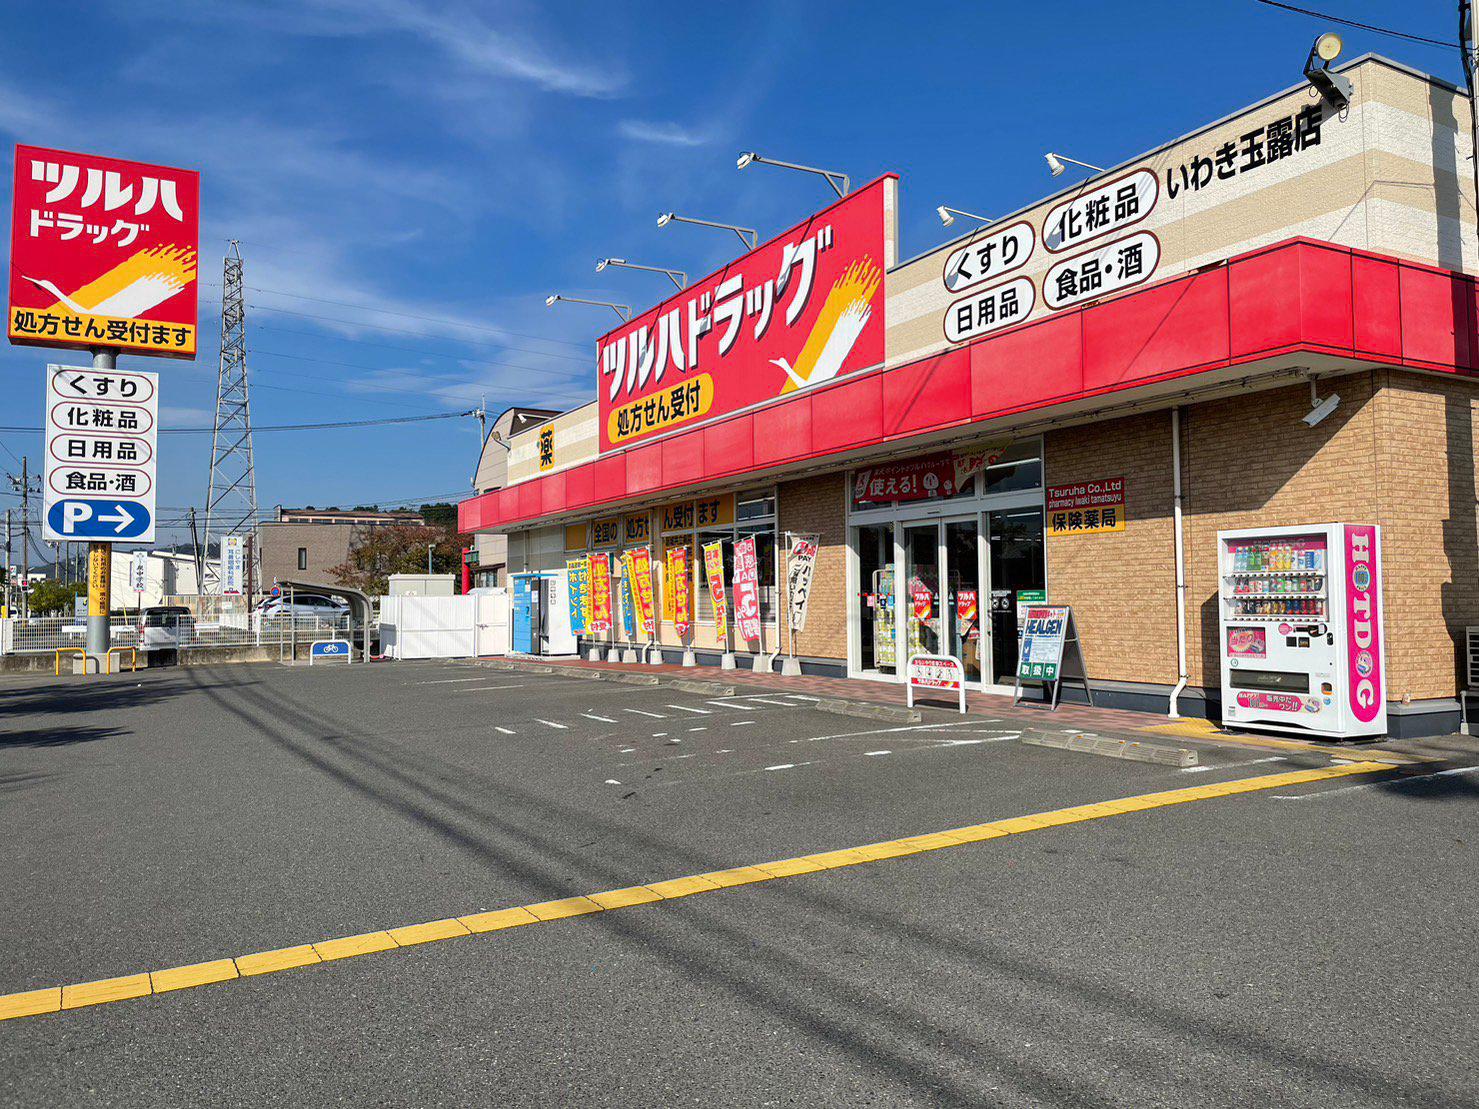 Images ツルハドラッグ いわき玉露店